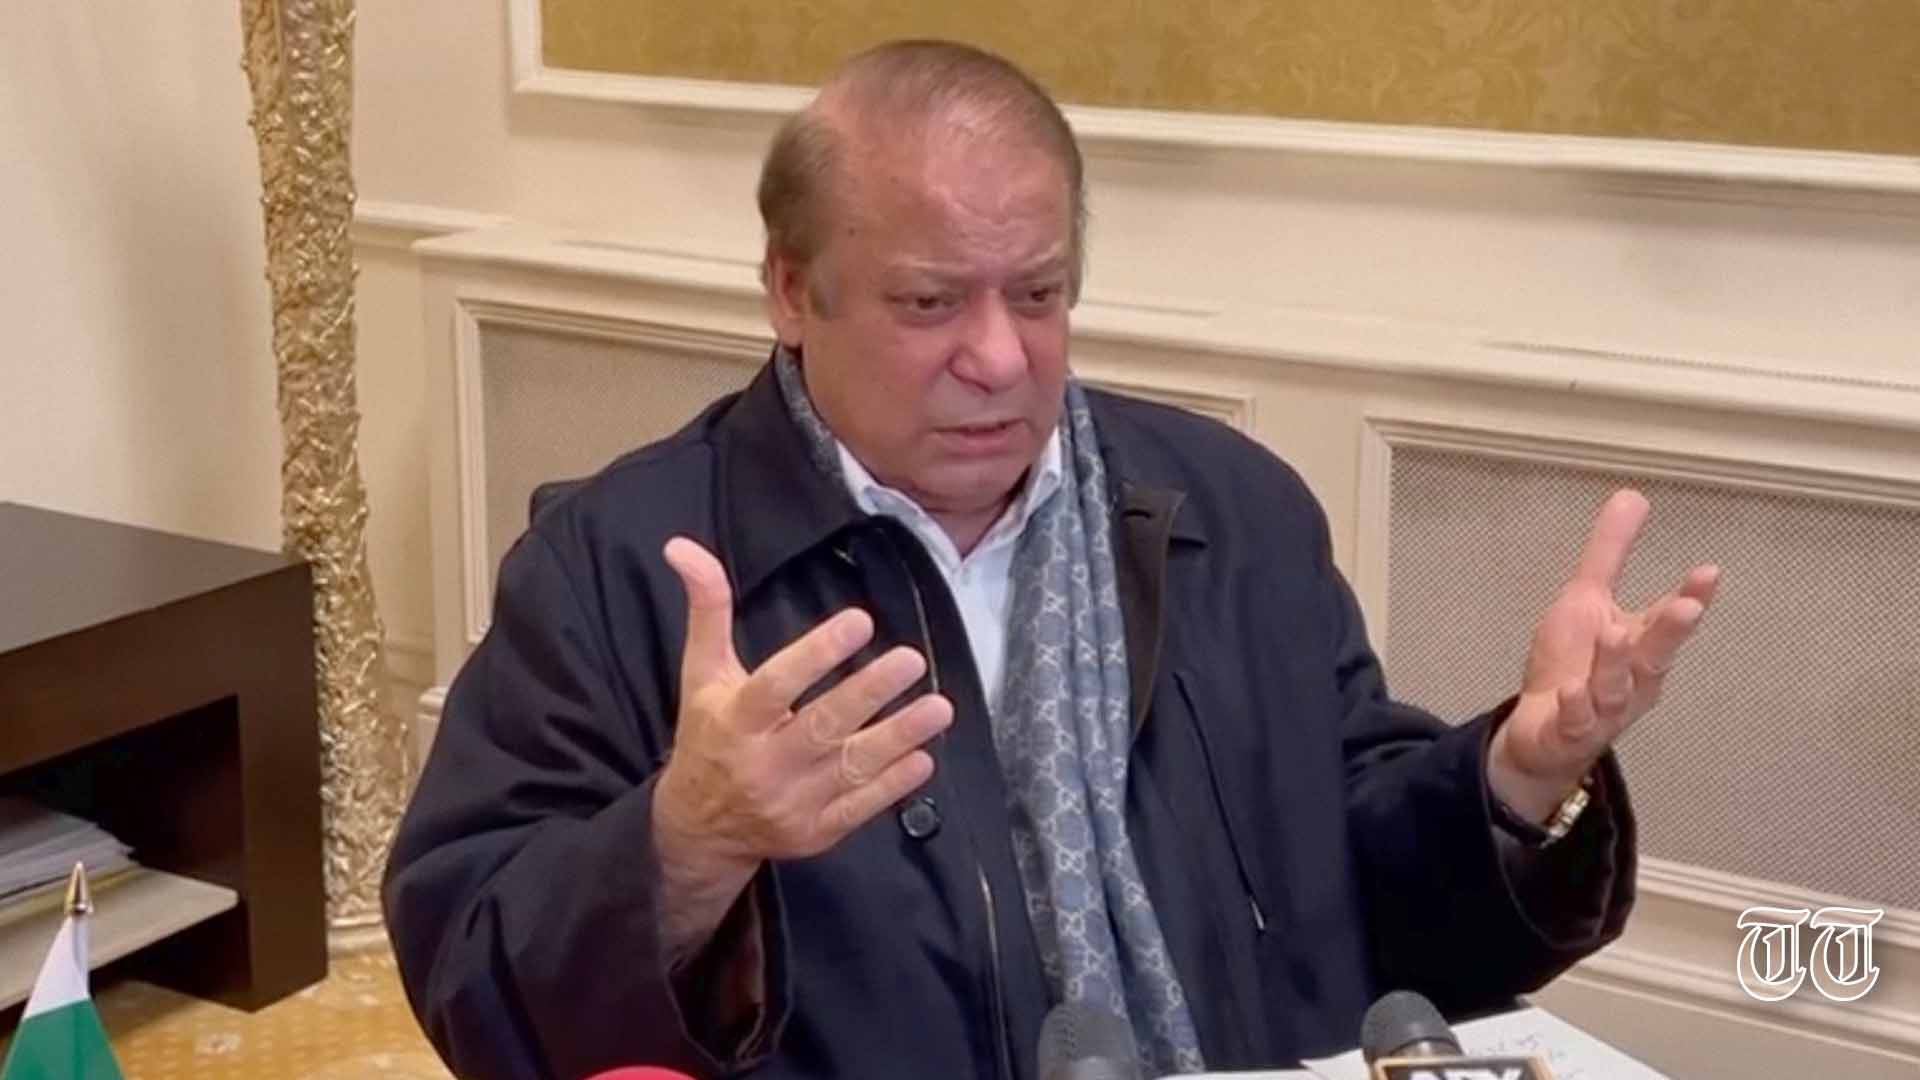 PML(N) chief Nawaz Sharif addresses reporters from his offices in London. — FILE/THE THURSDAY TIMES